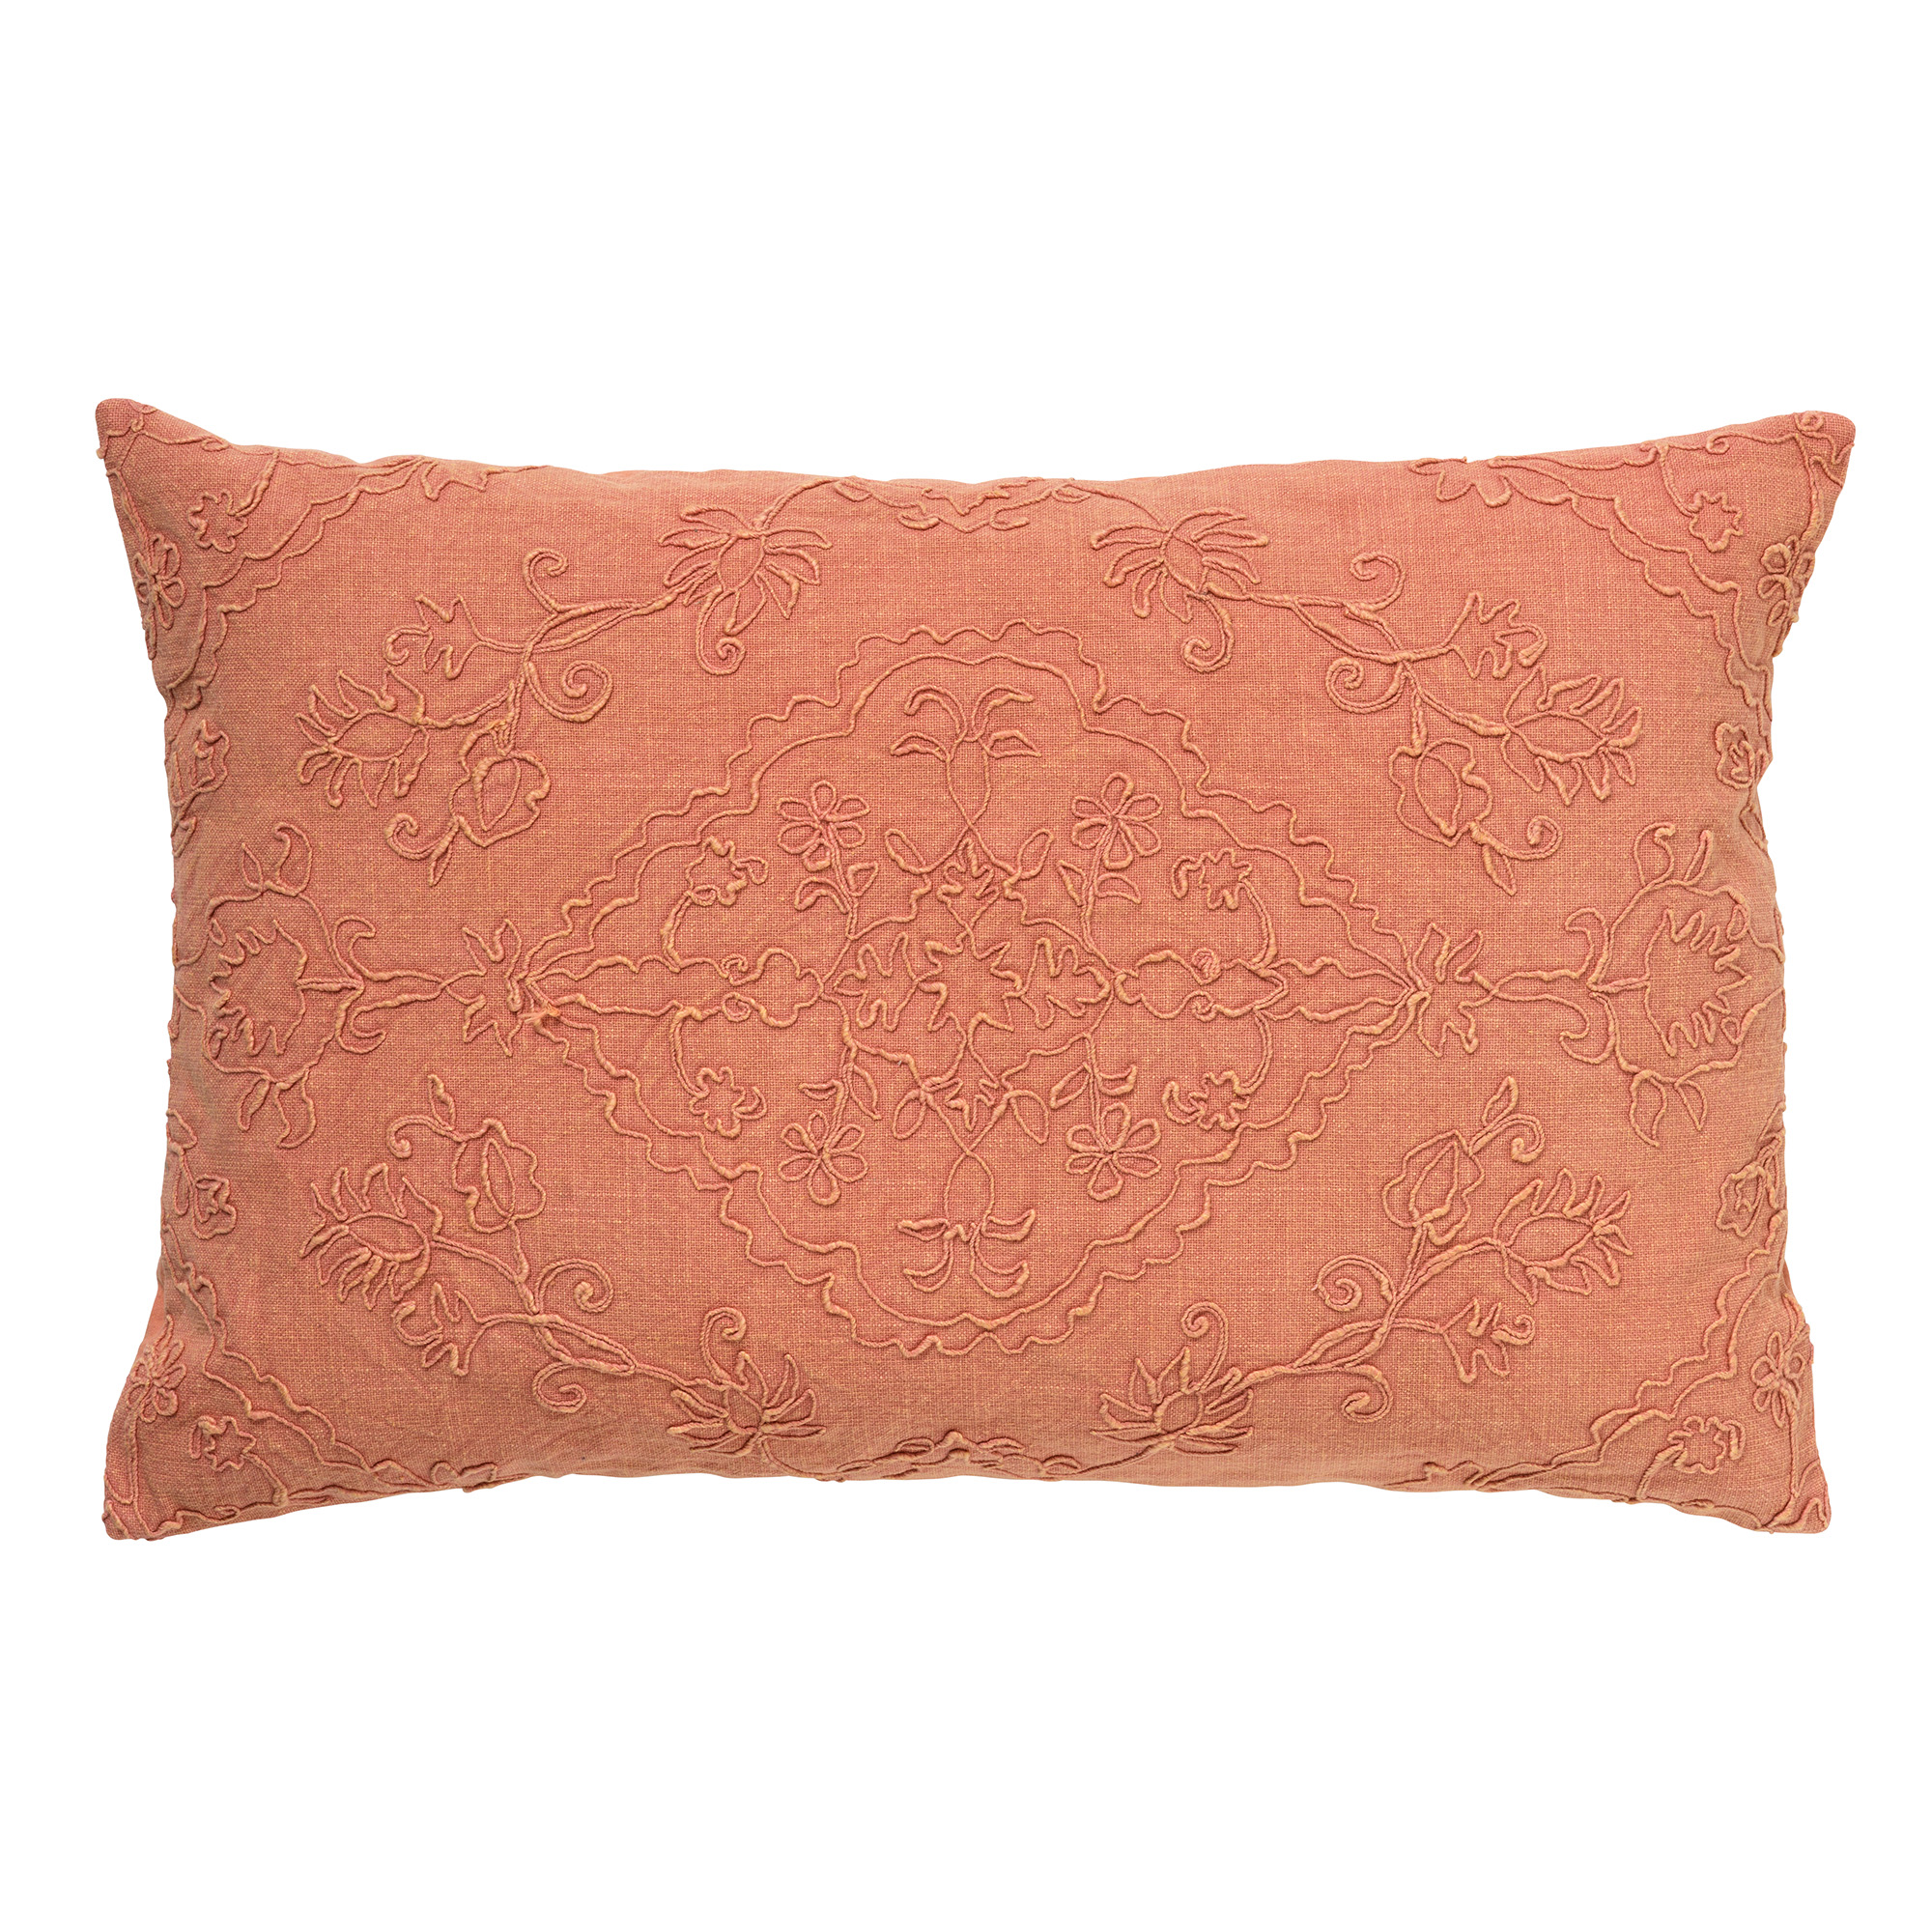 EVY - Cushion 40x60 cm Muted Clay - pink